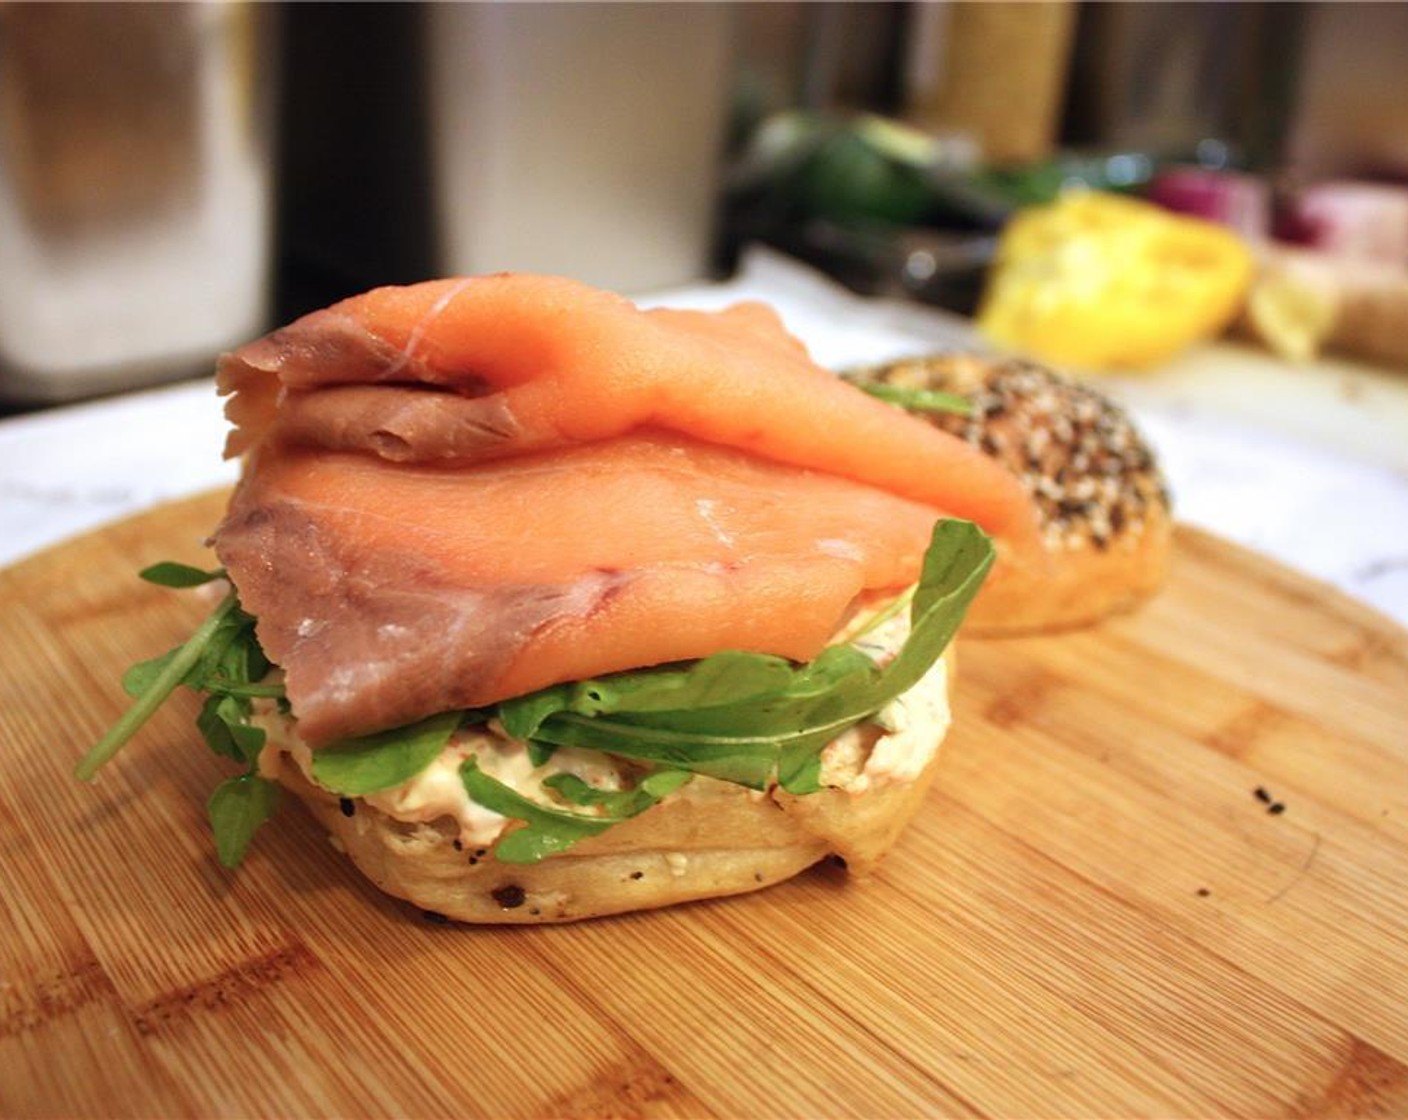 step 4 On bottom half of bagel, place Arugula (1/2 cup) on top of the tobiko cream cheese, and then nicely place the Smoked Salmon (2 slices) over the arugula.